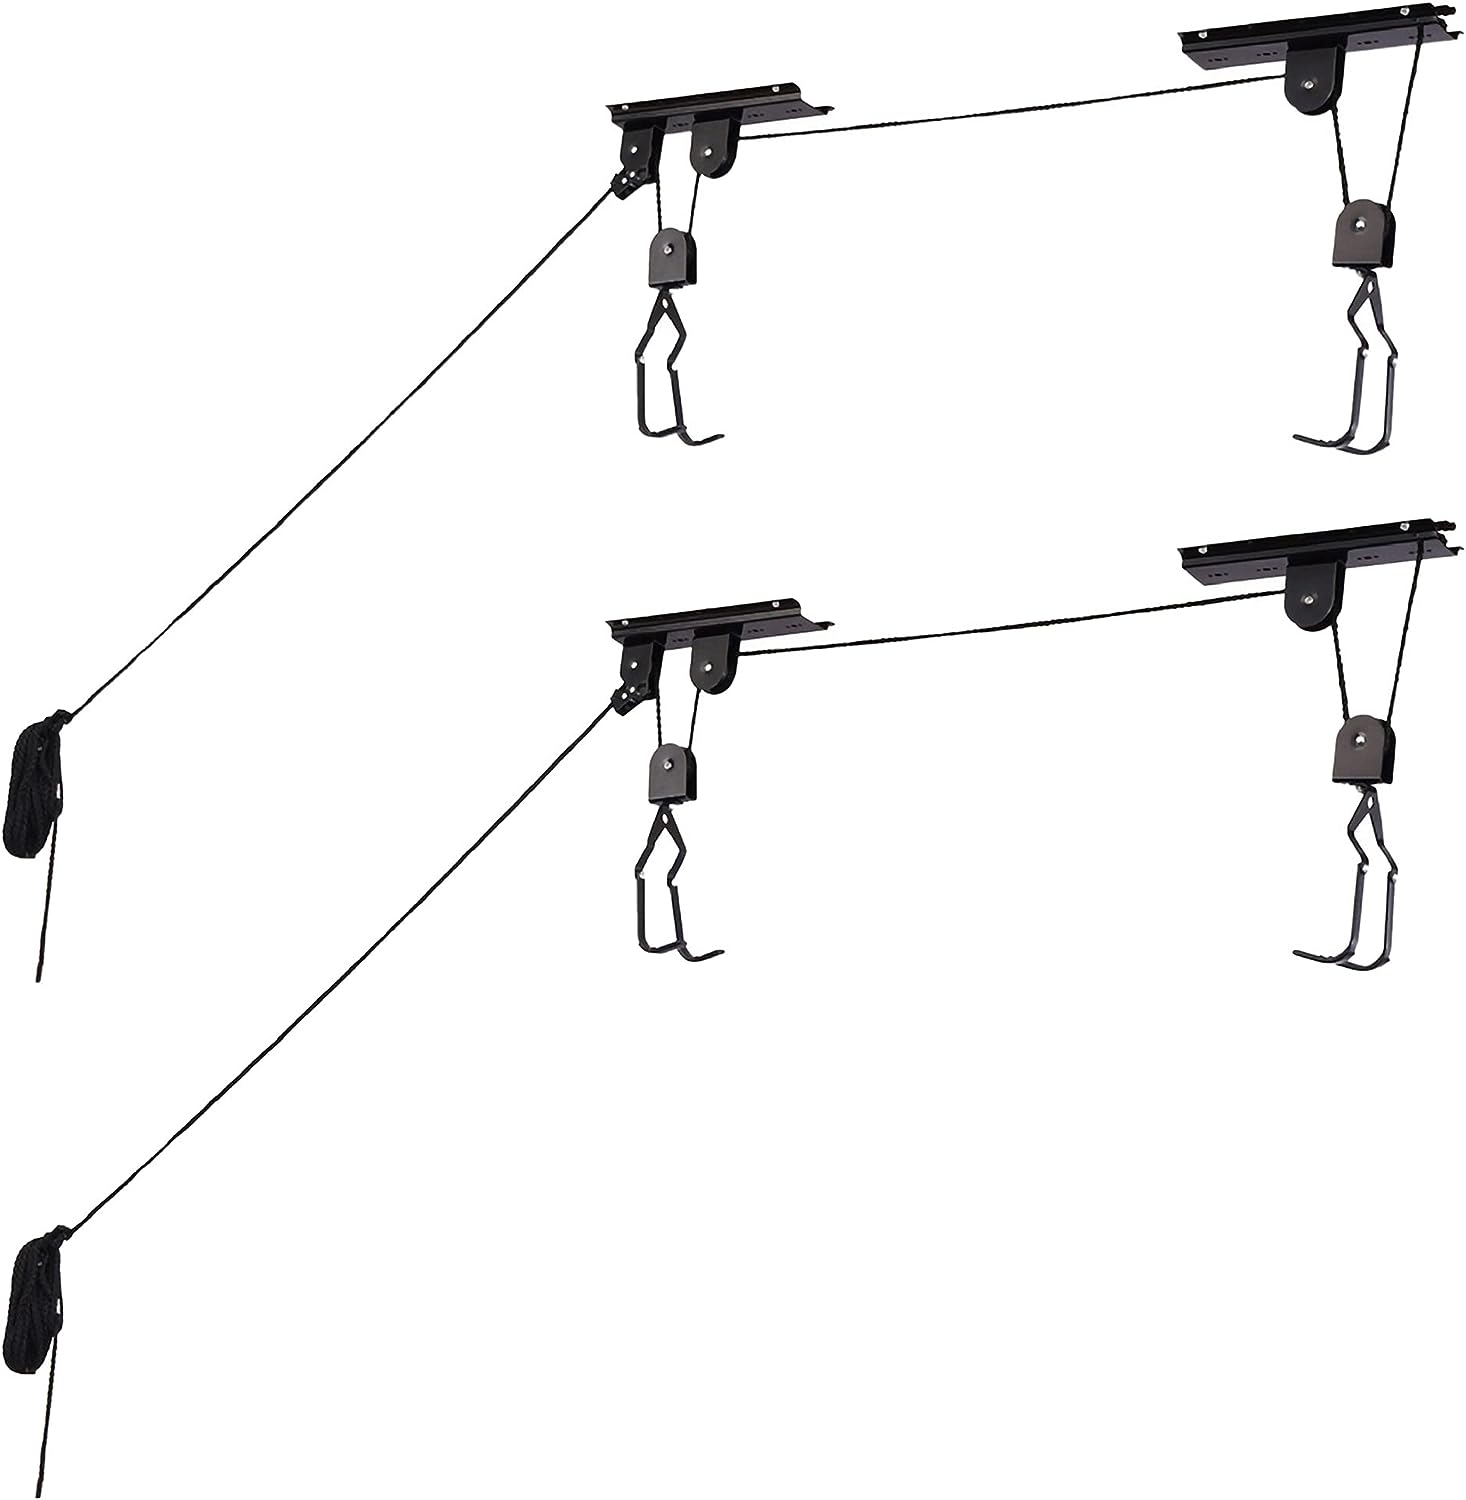 Bike Hoists - Overhead Pulley System with 100 lb [...]